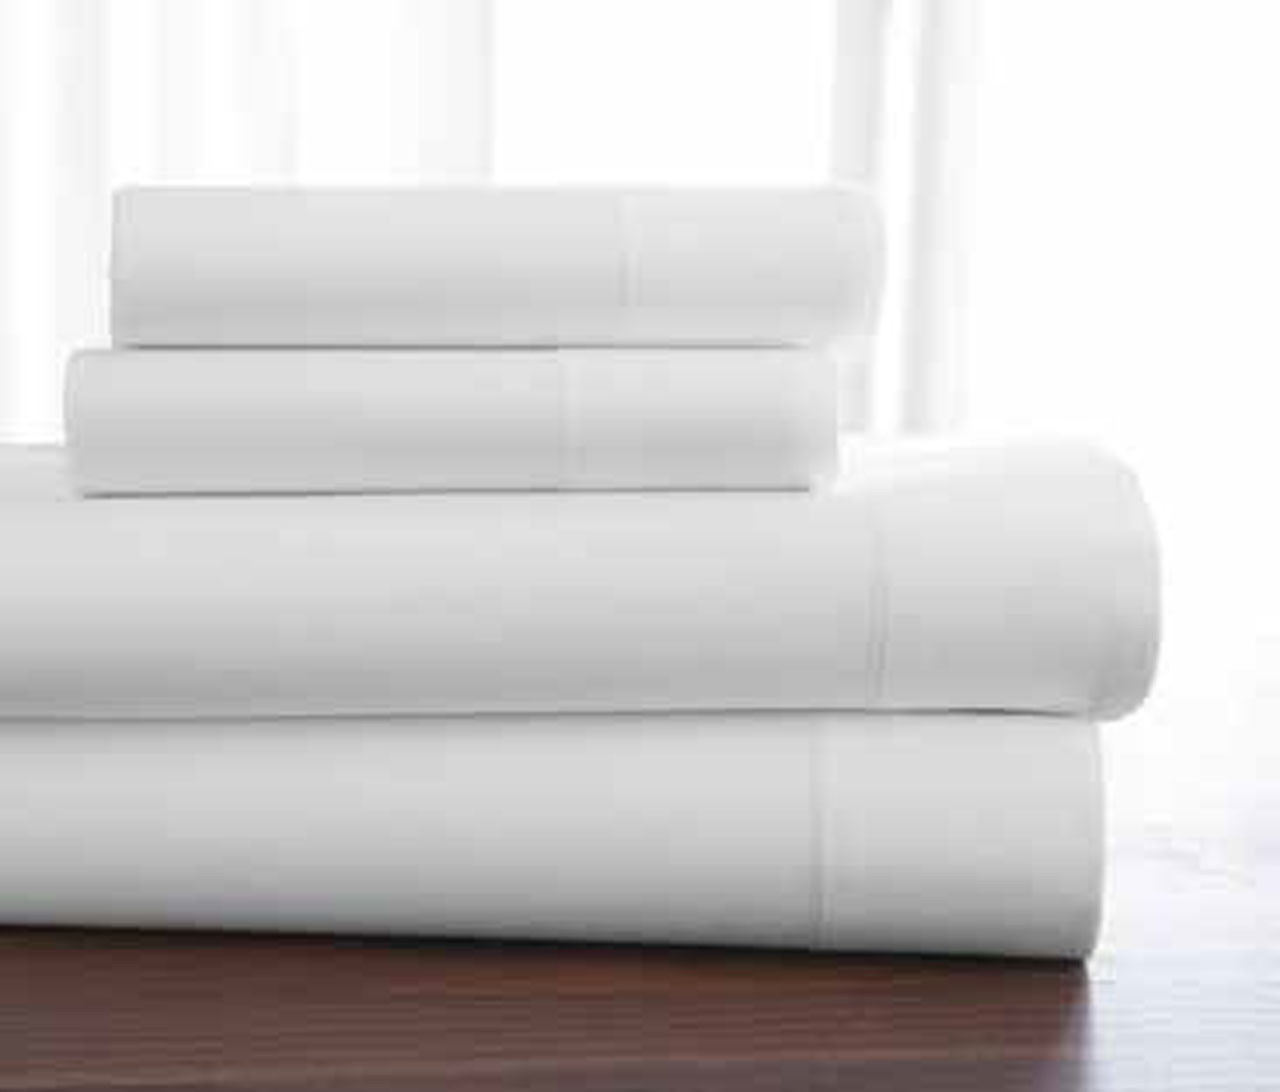 What are the advantages of Welspun T-400 Premium hygrocotton sheets?